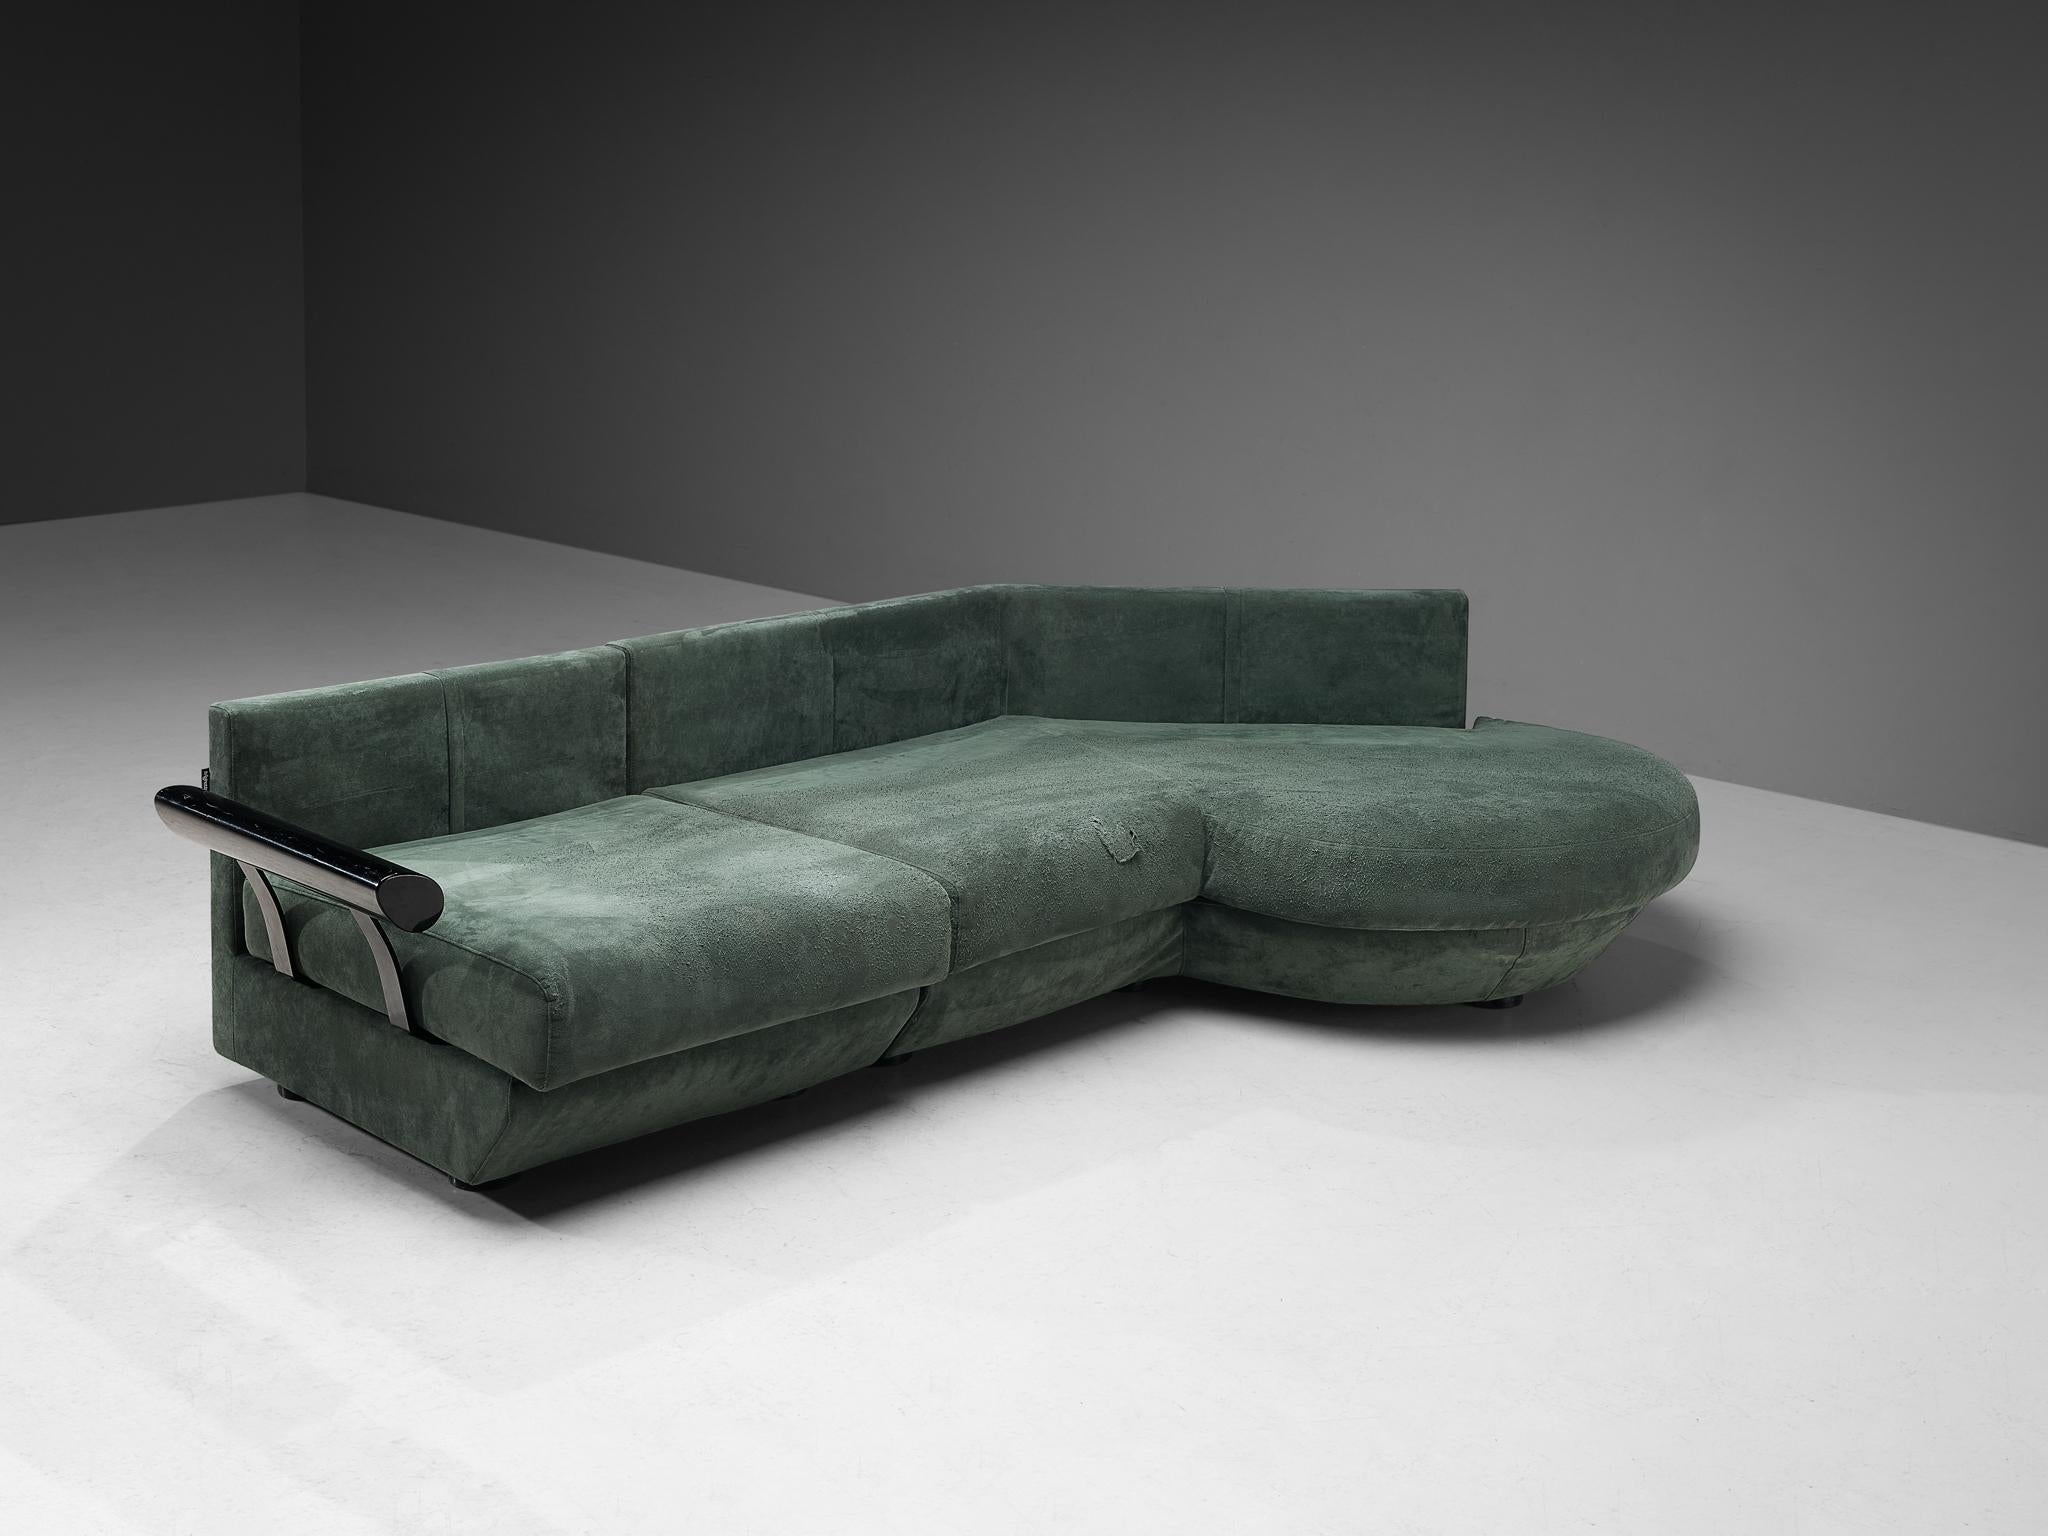 Frighetto, sectional sofa, alcantara / ultrasuede, plastic, coated metal, Italy, 1980s 

Beautiful Italian sofa in soft green upholstery that embraces the sensuous curves. Due to the organic shape and the strict angles of the back, the sofa gets a